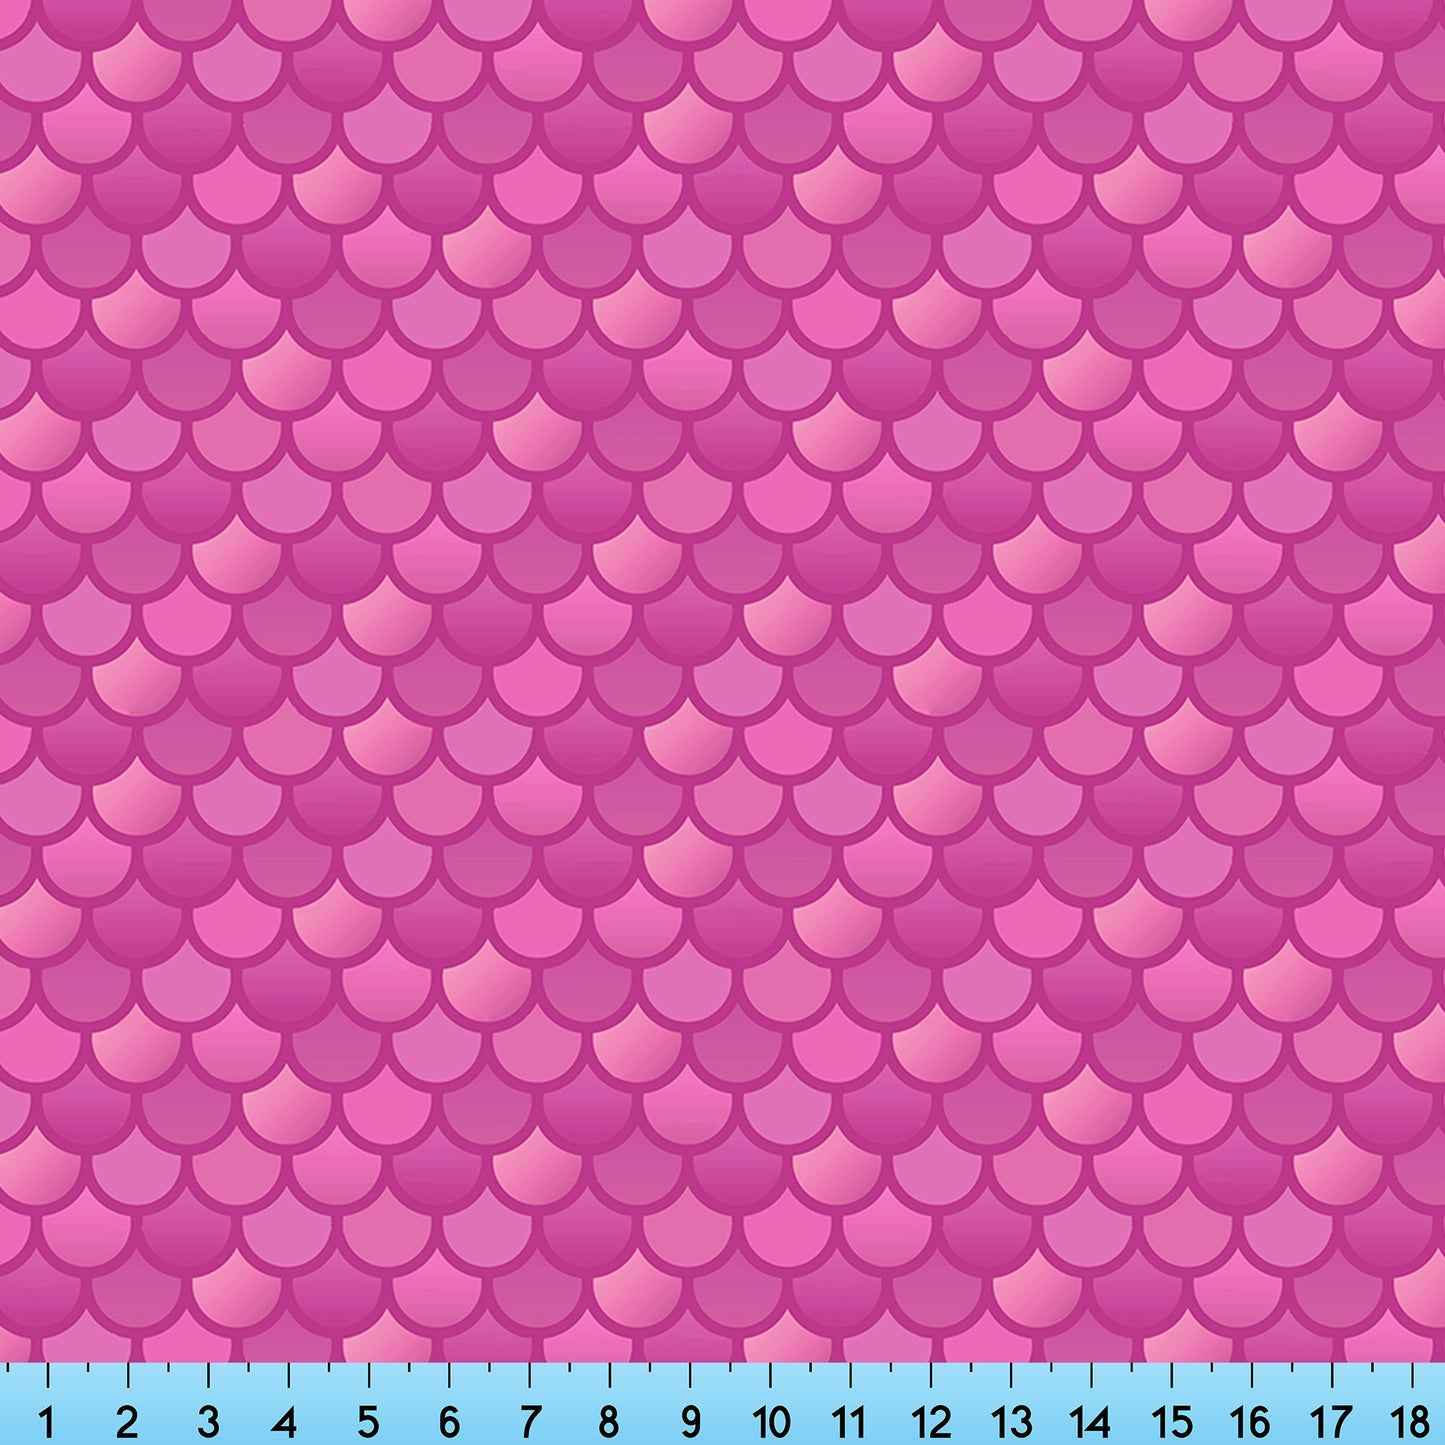 Pink Mermaid Scales Fabric By the Yard, Half Yard and Fat Quarter